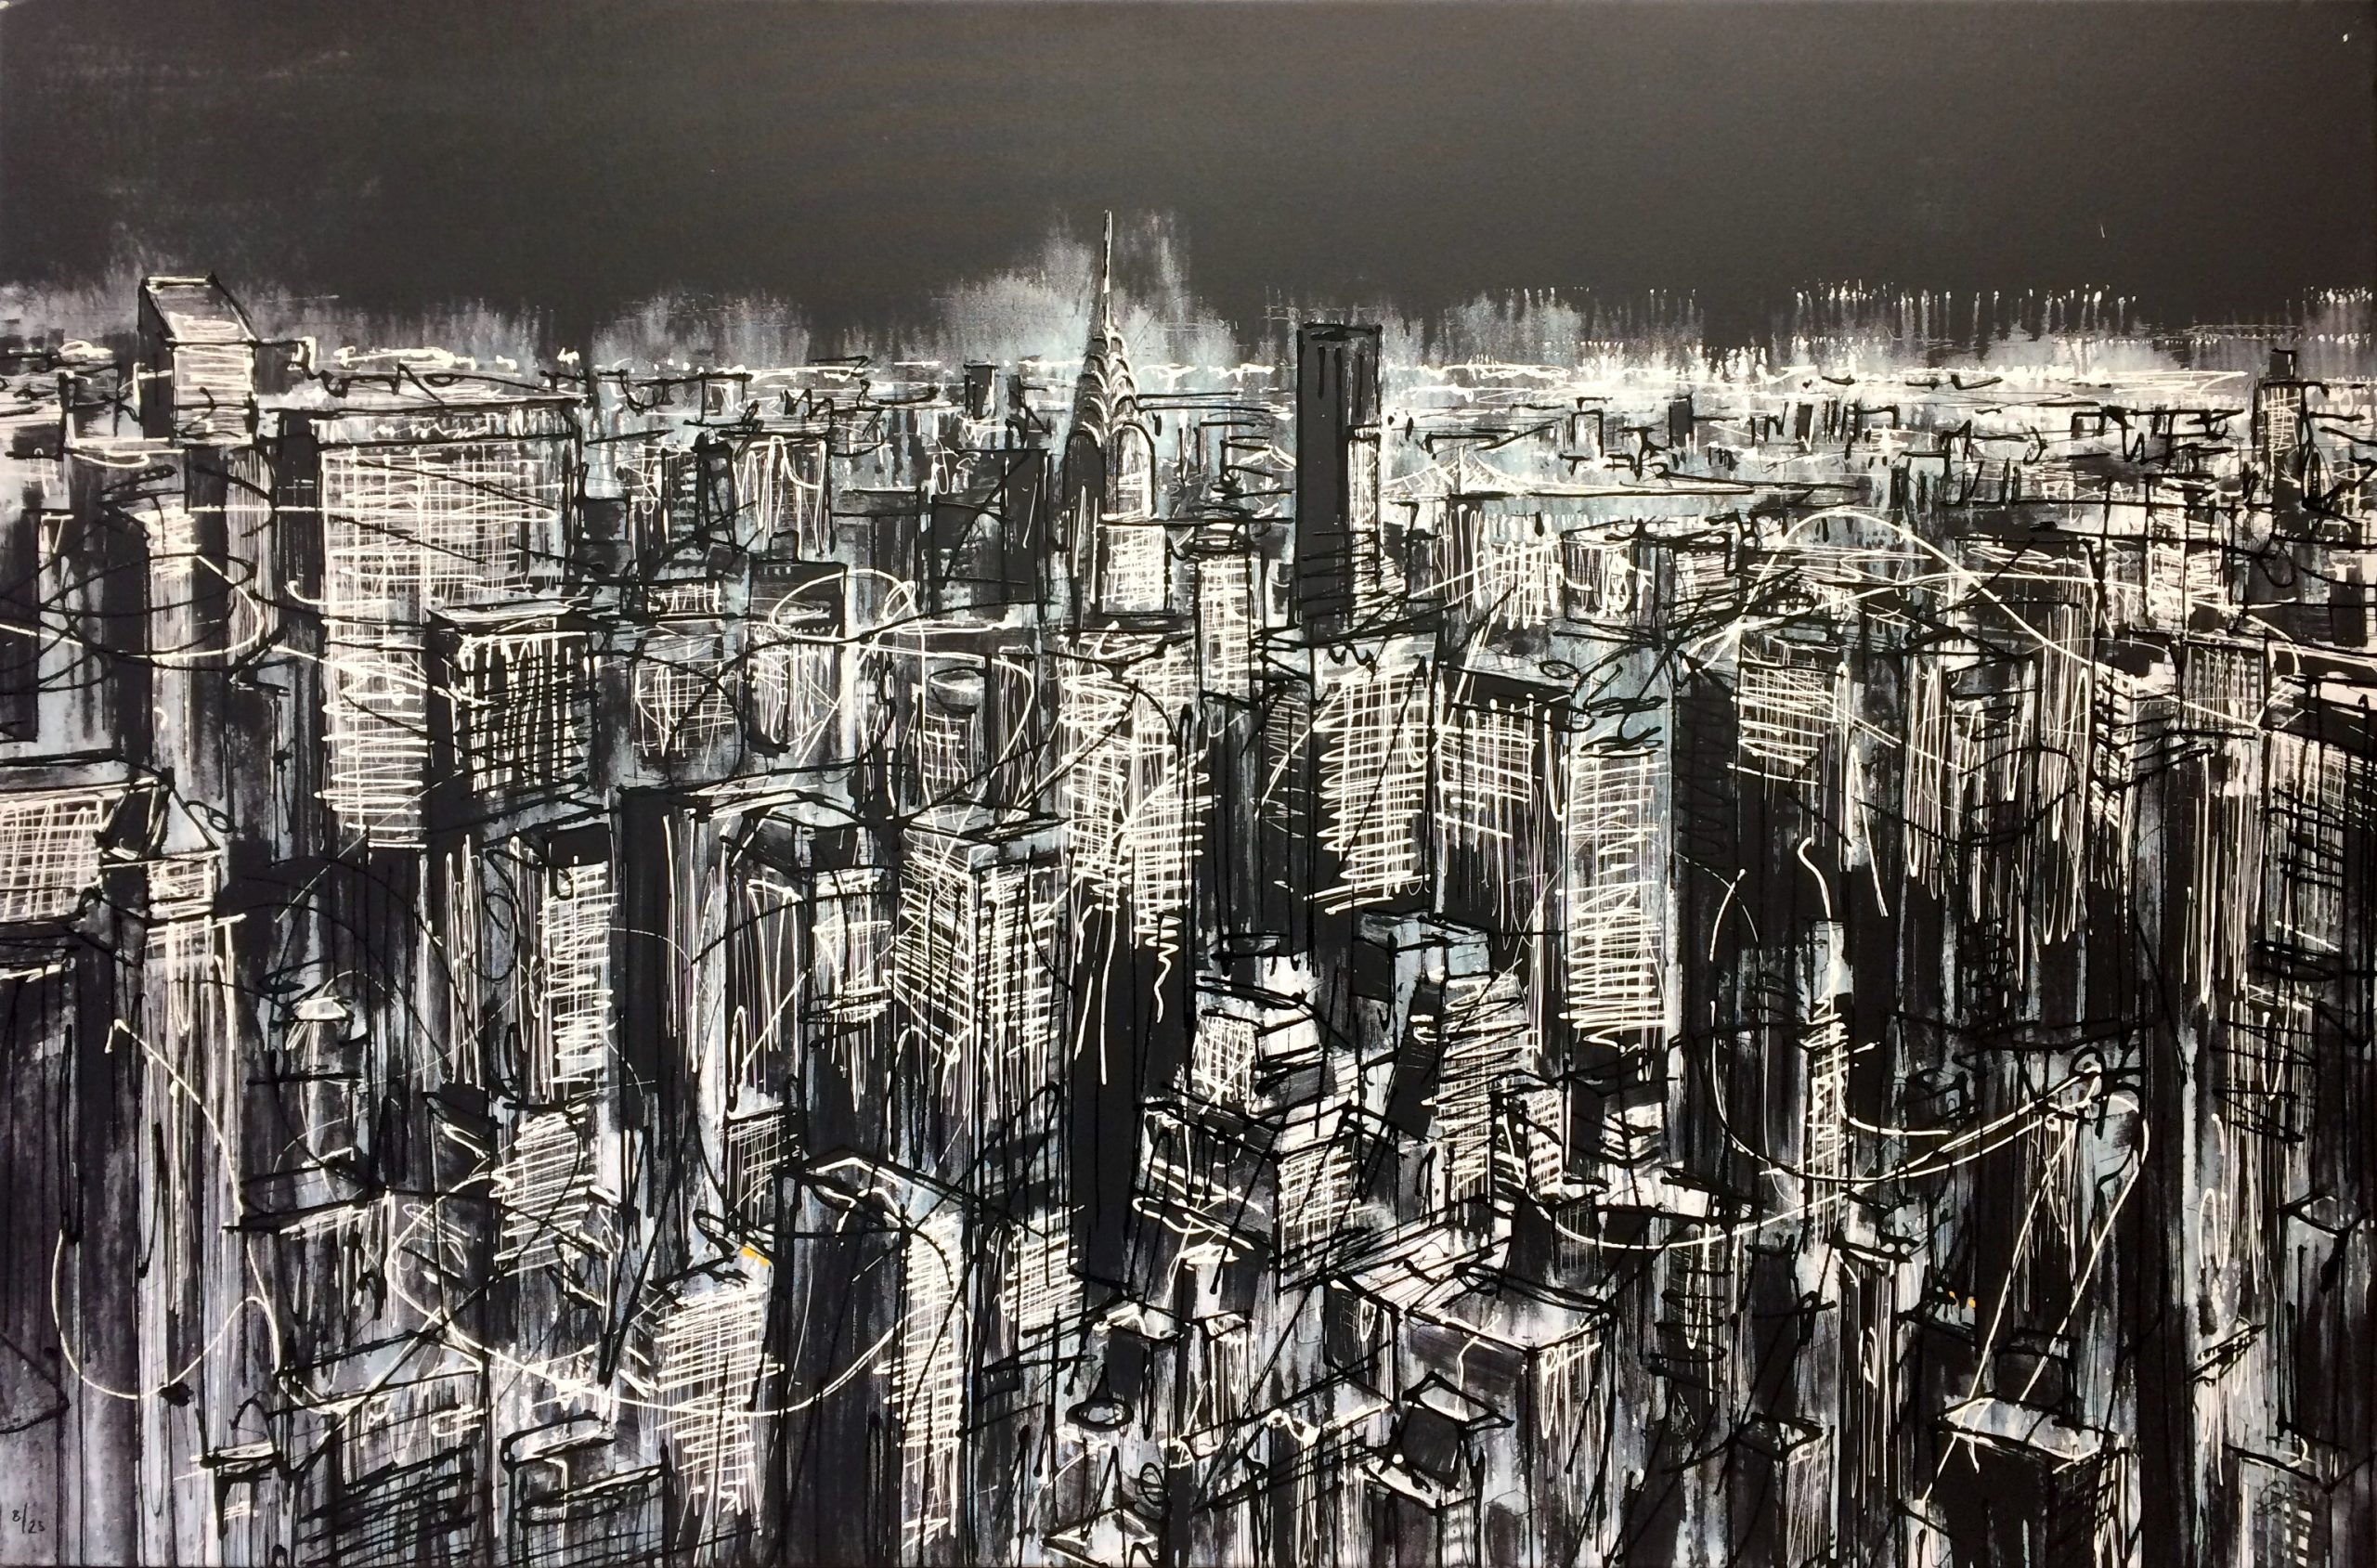 Manhattan by Paul Kenton, UK contemporary cityscape artist, a limited edition print from his New York Collection